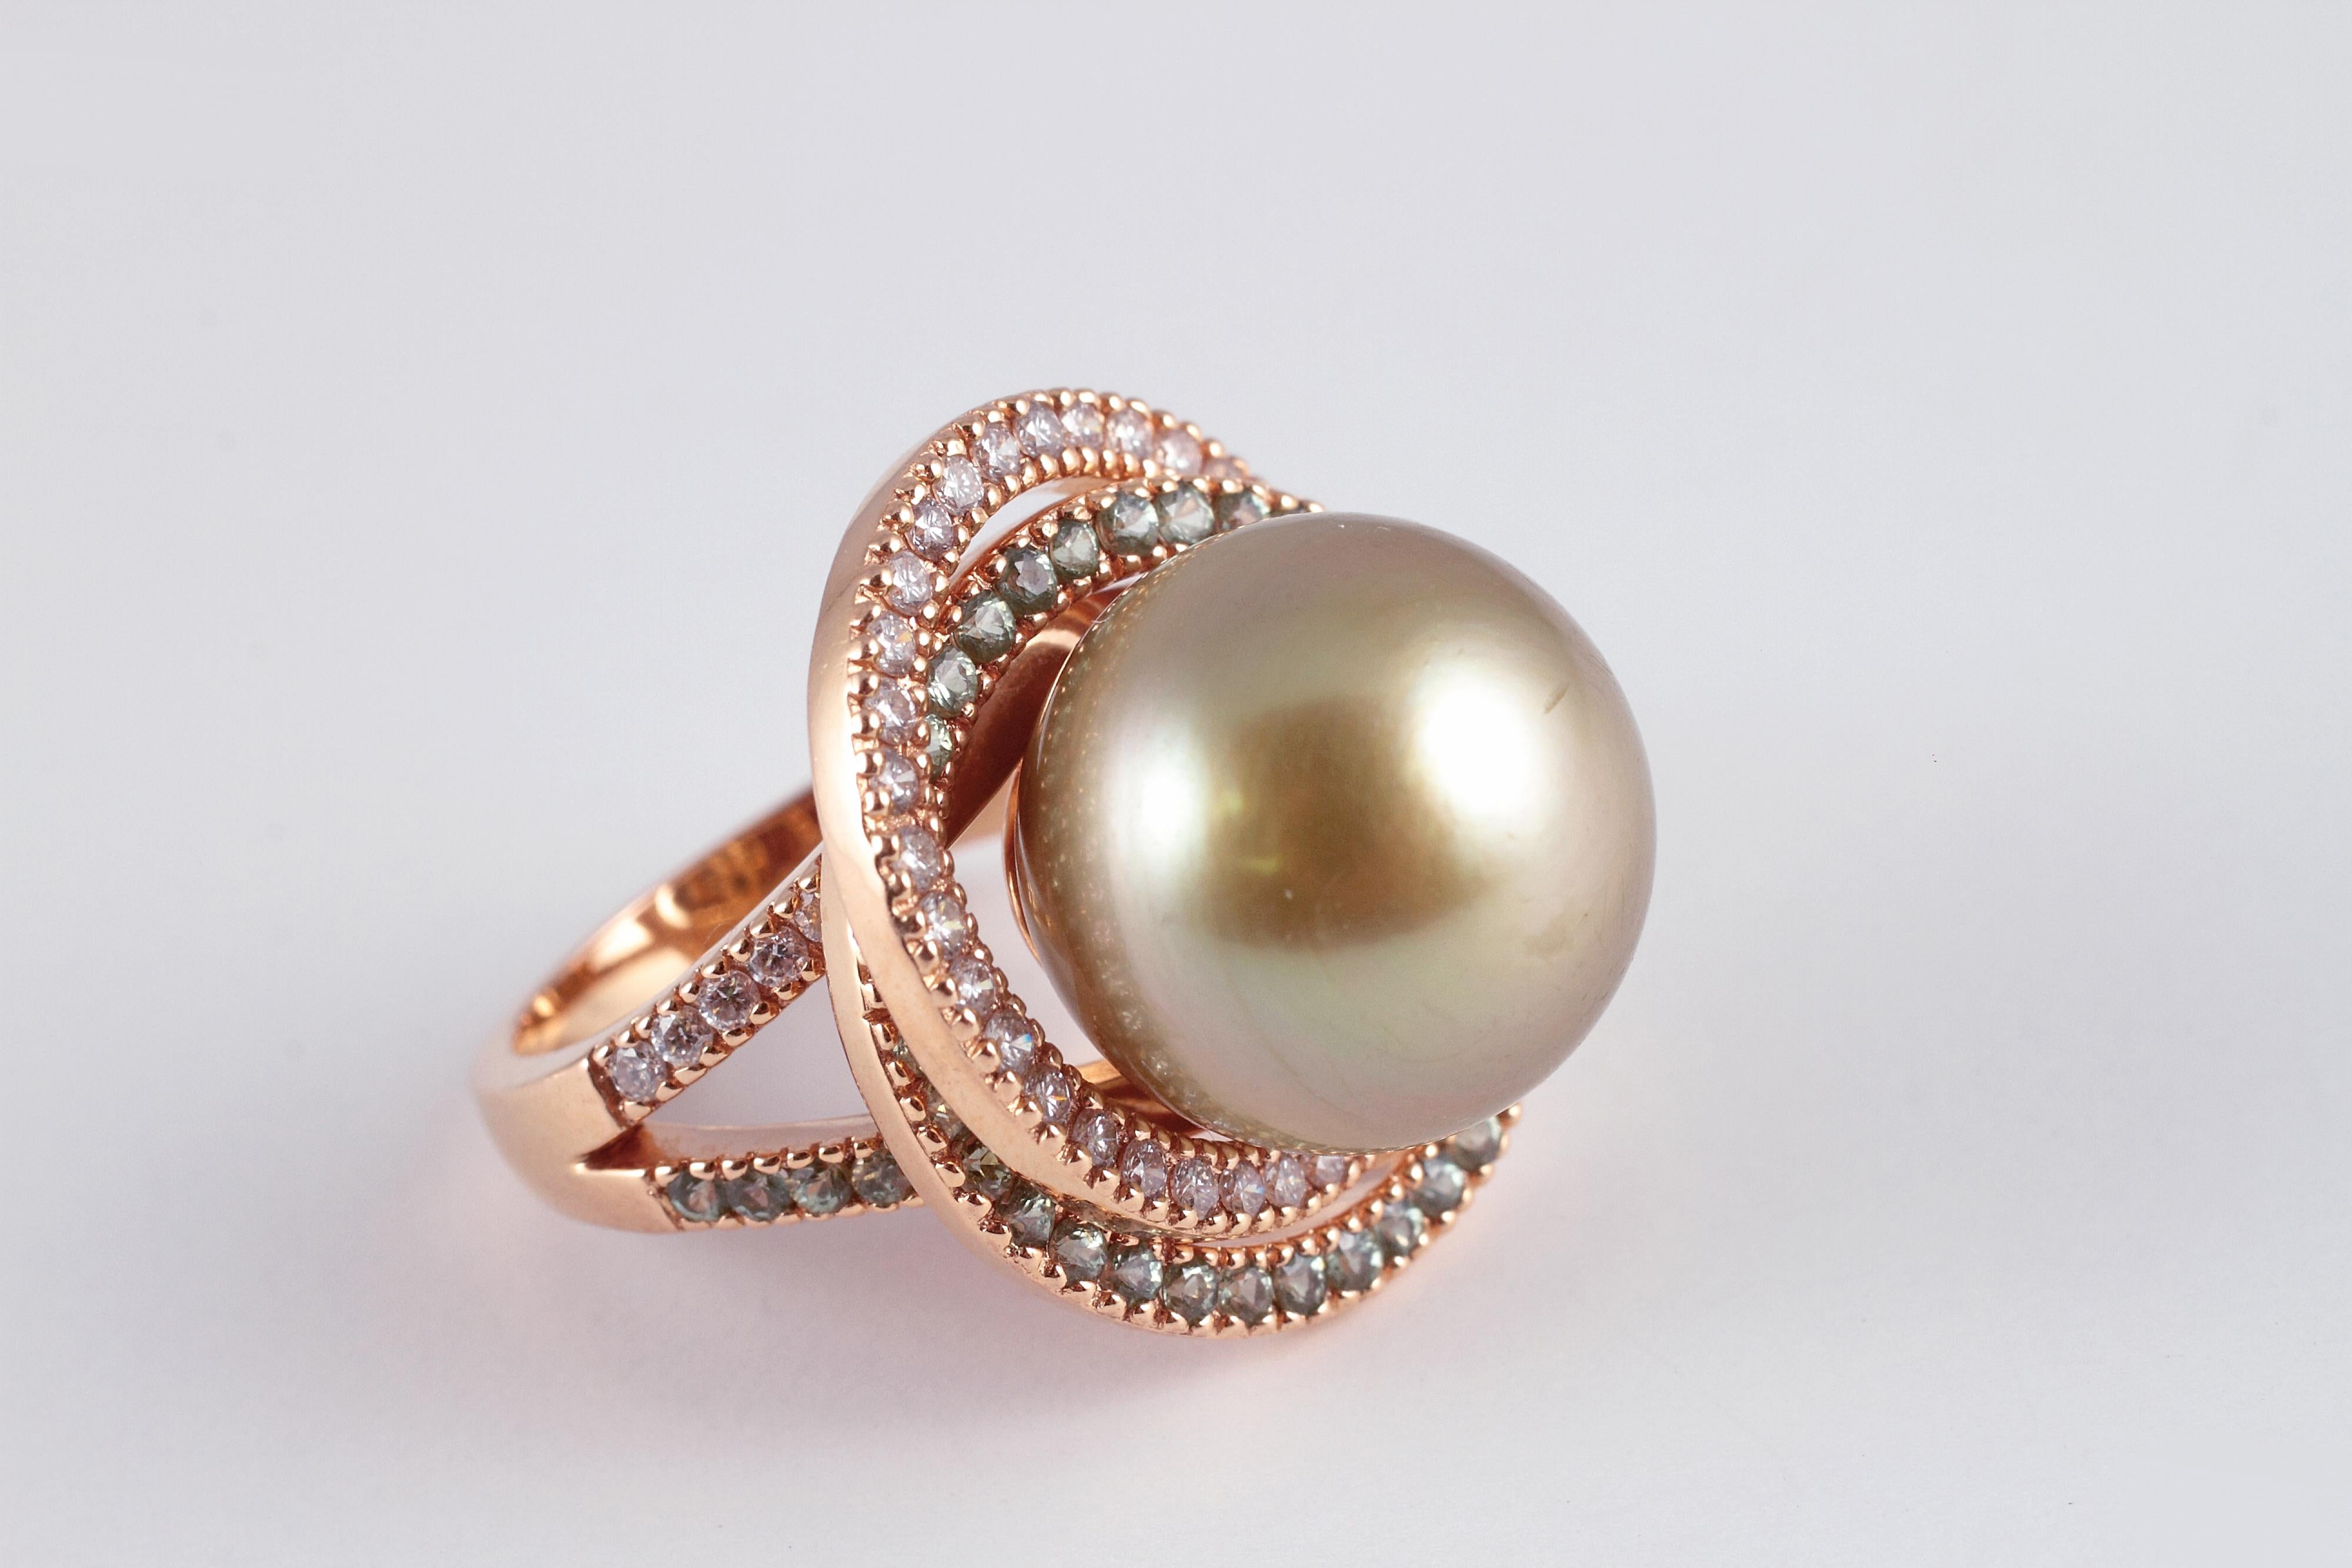 From famed Australian designer, Margot McKinney......This attractive pearl is in a lovely 